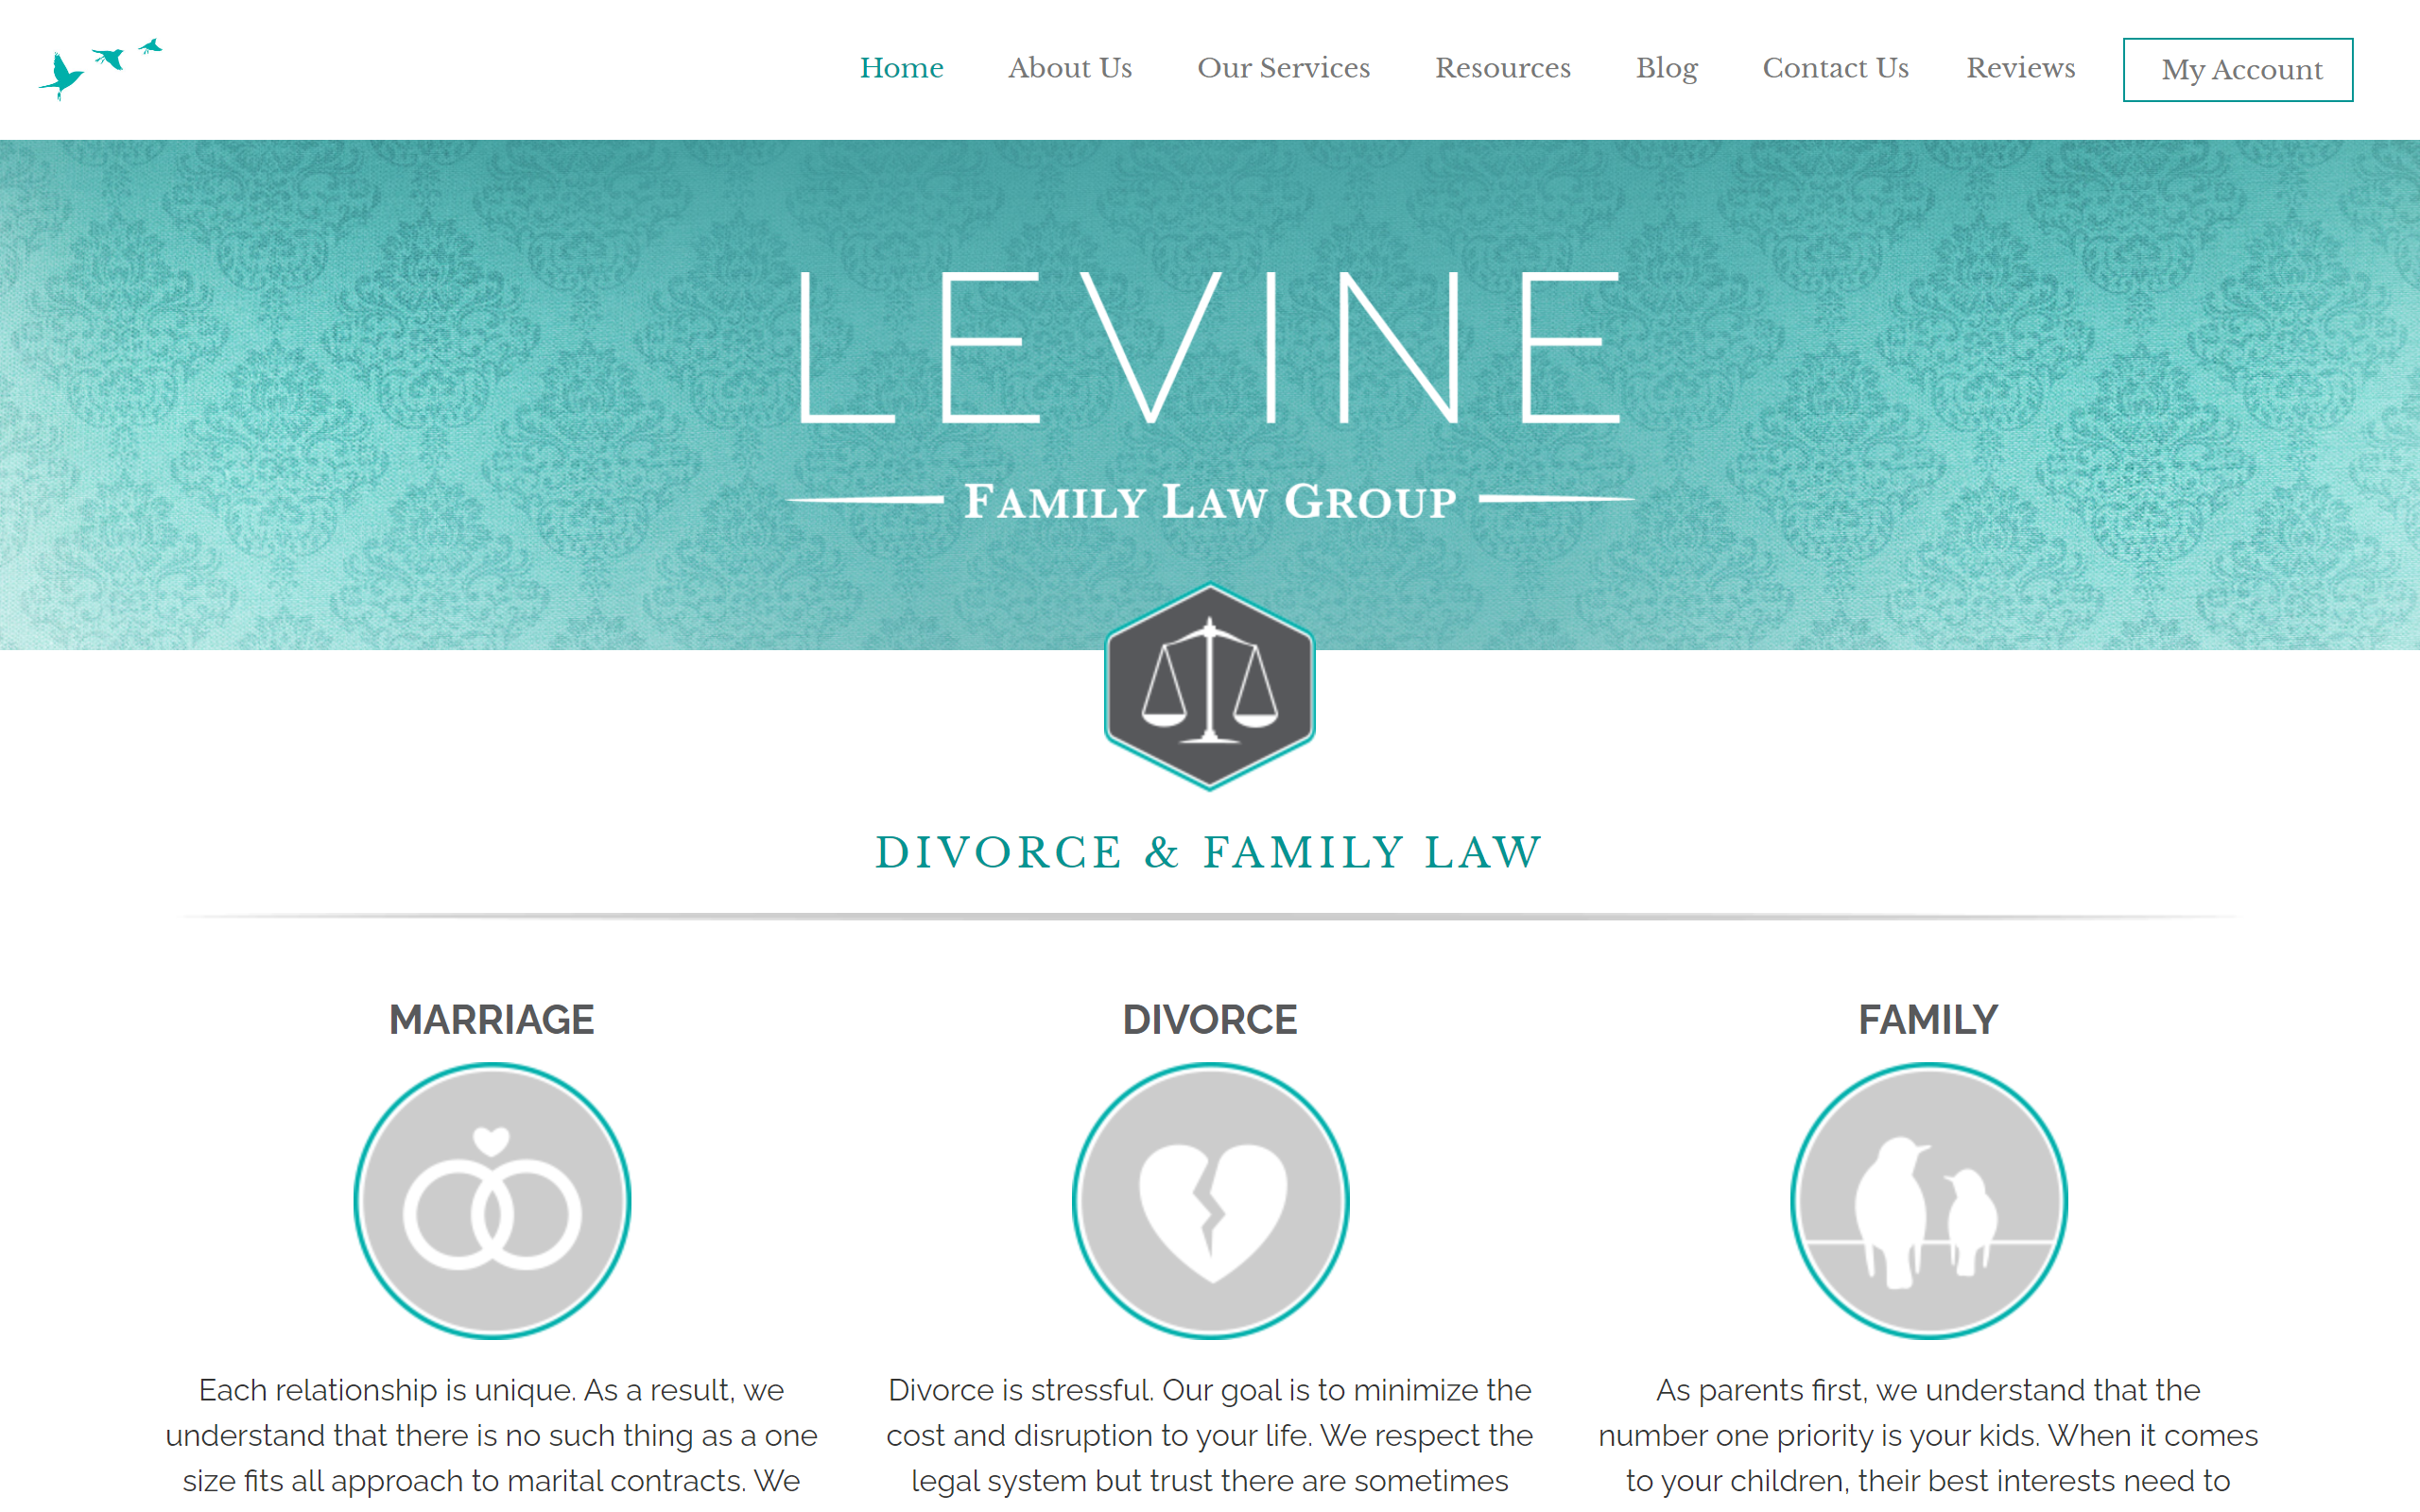 Levine Family Law Group law firm website